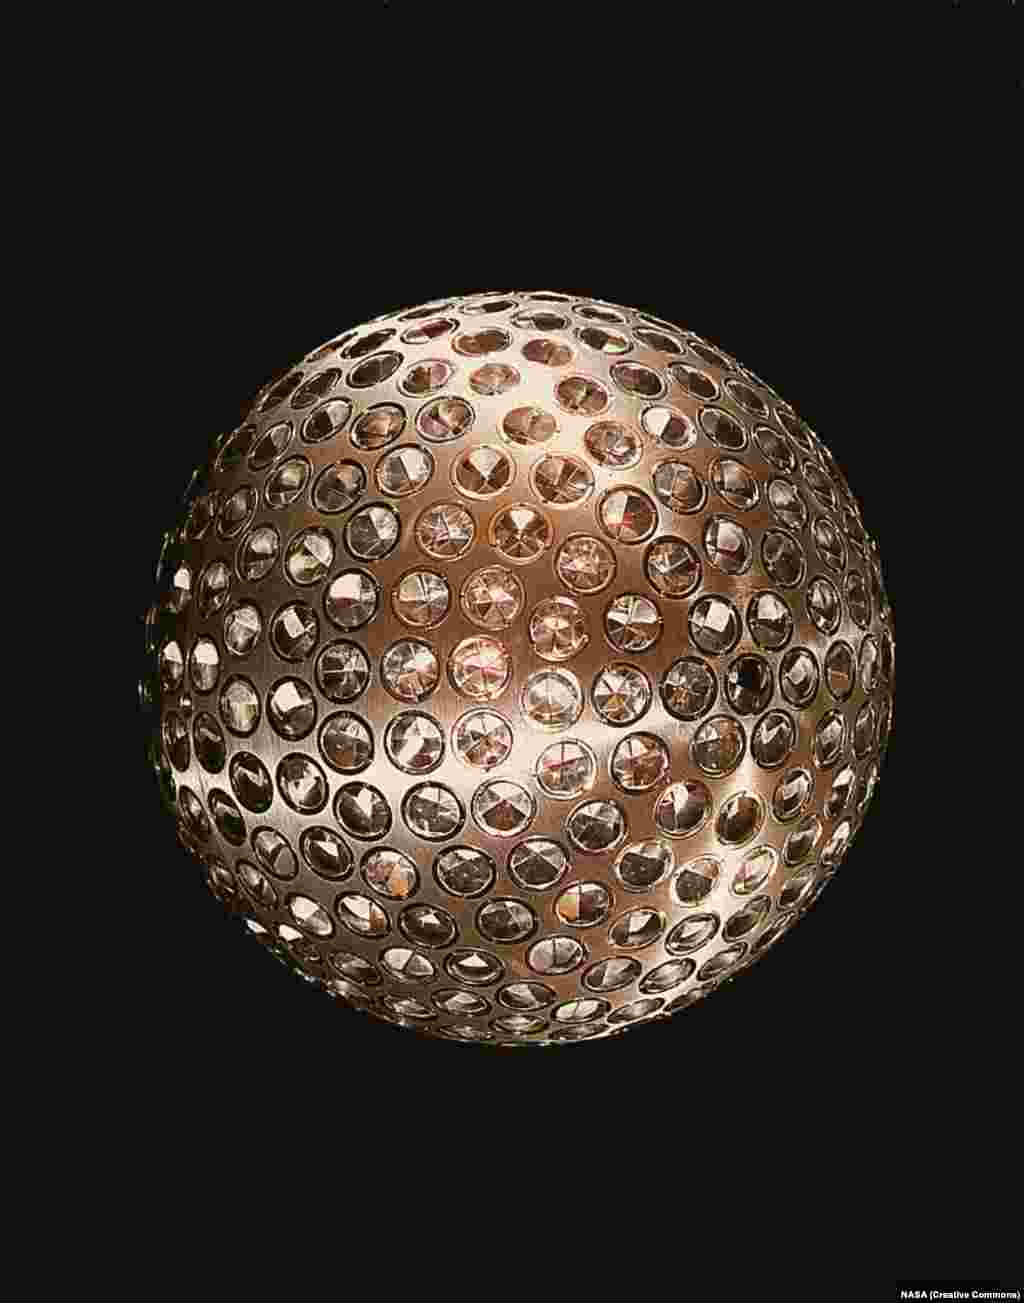 NASA&rsquo;s cosmic disco ball, known as LAGEOS 1, was blasted into orbit in 1976. The 400-kilogram aluminum-and-brass sphere is pocked with reflectors that allow lasers on Earth to precisely measure the drift of tectonic plates and the exact shape of the planet.